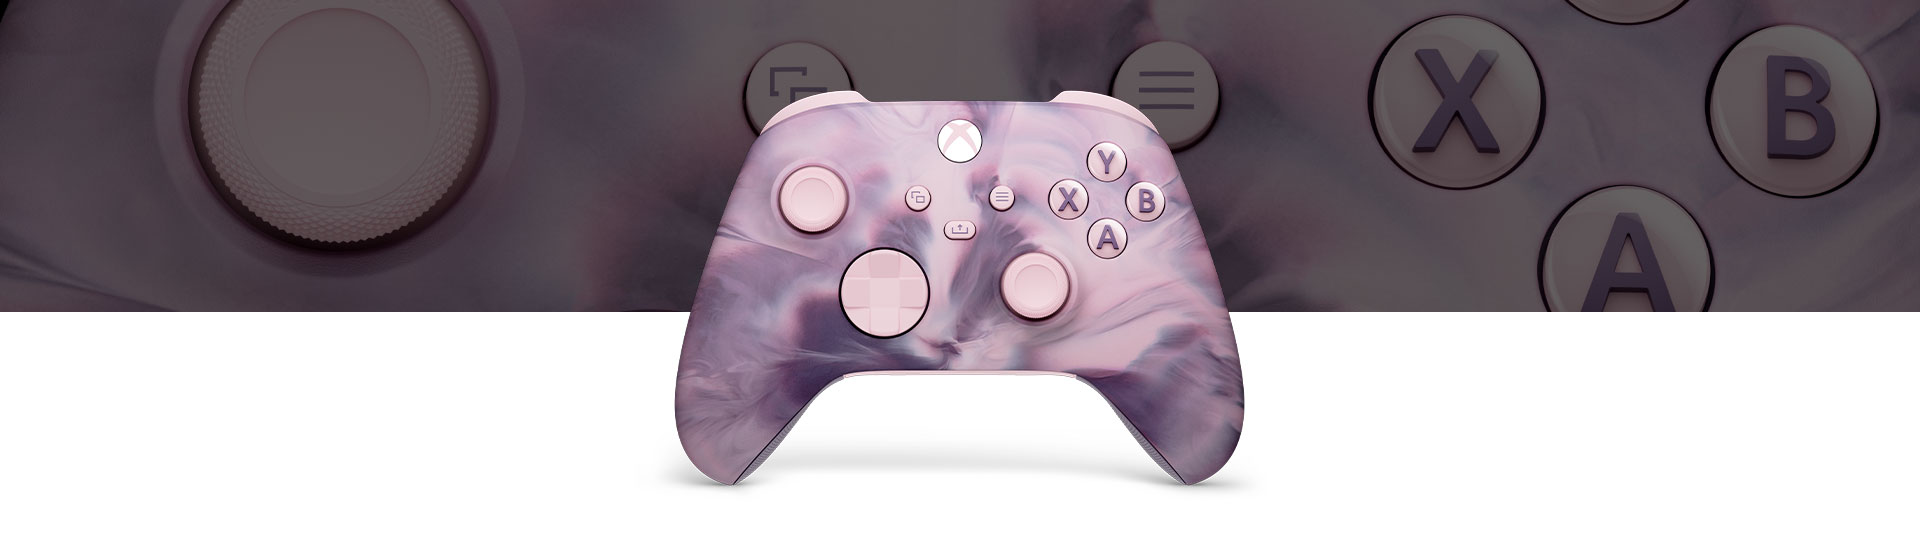 Front view of Xbox Wireless Controller – Dream Vapor Special Edition with close-up view in the background.